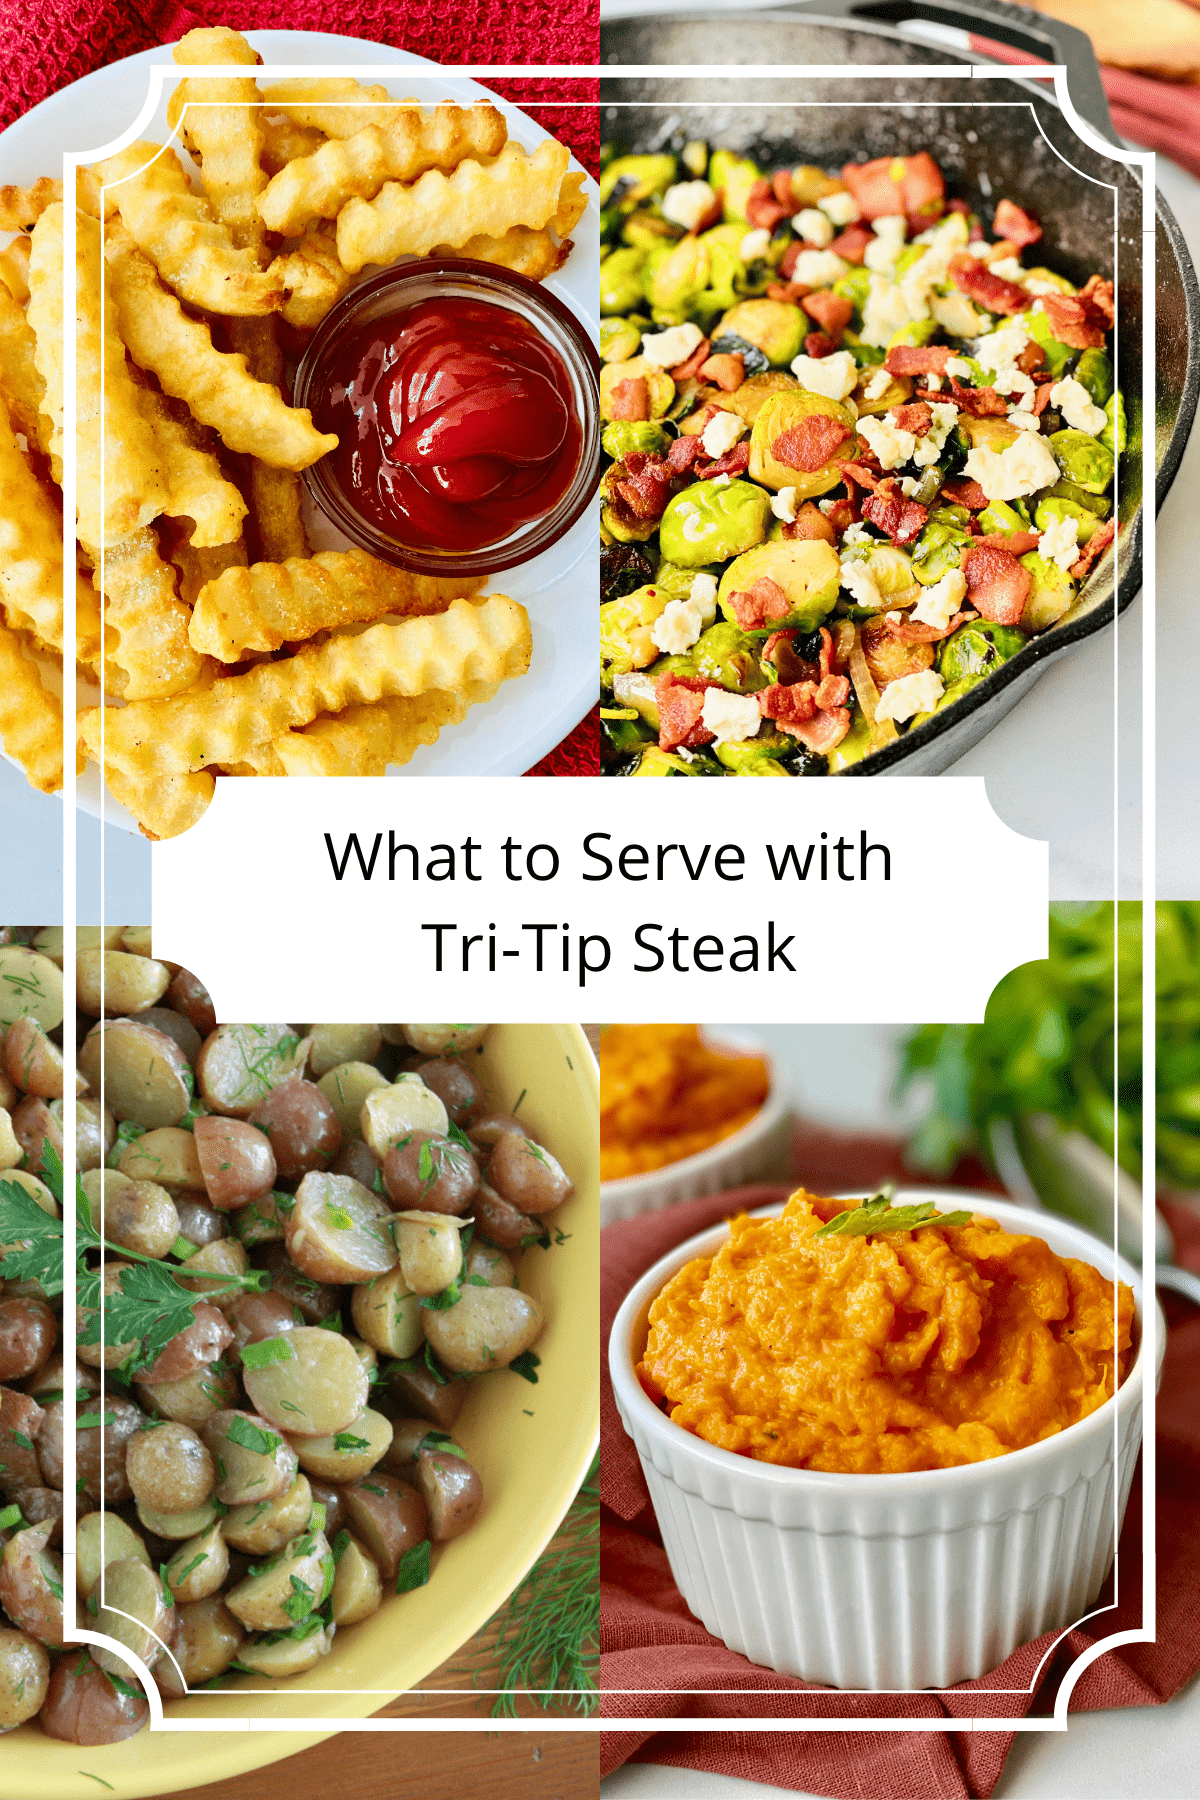 4 recipes air fryer french fries brussel sprouts with bacon french potato salad and whipped sweet potatoes